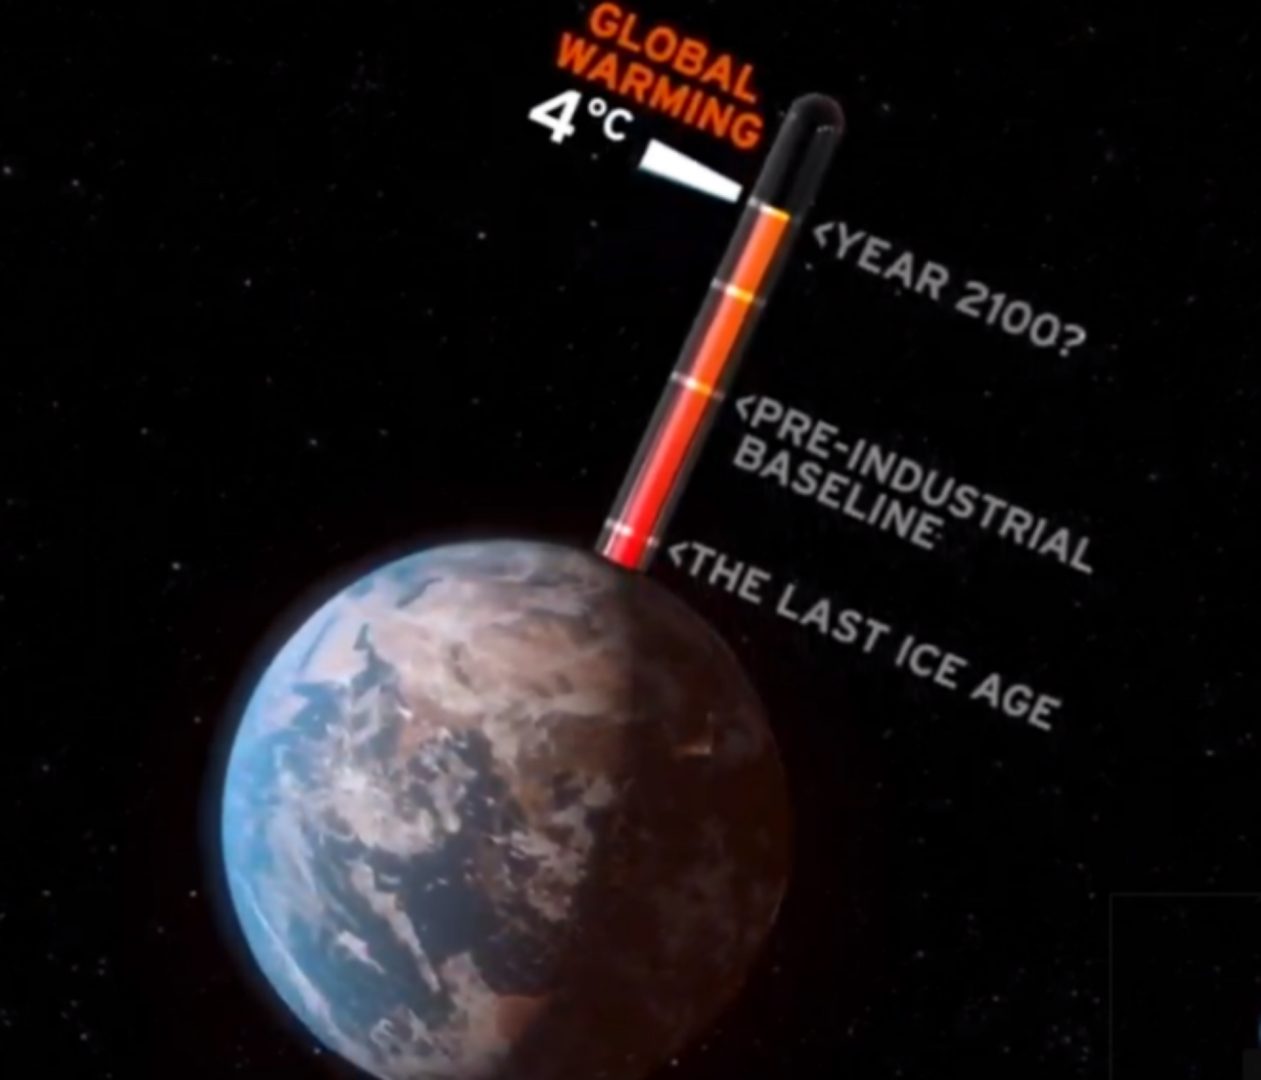 Climate scientists say a few degrees Celsius matters for climate change.